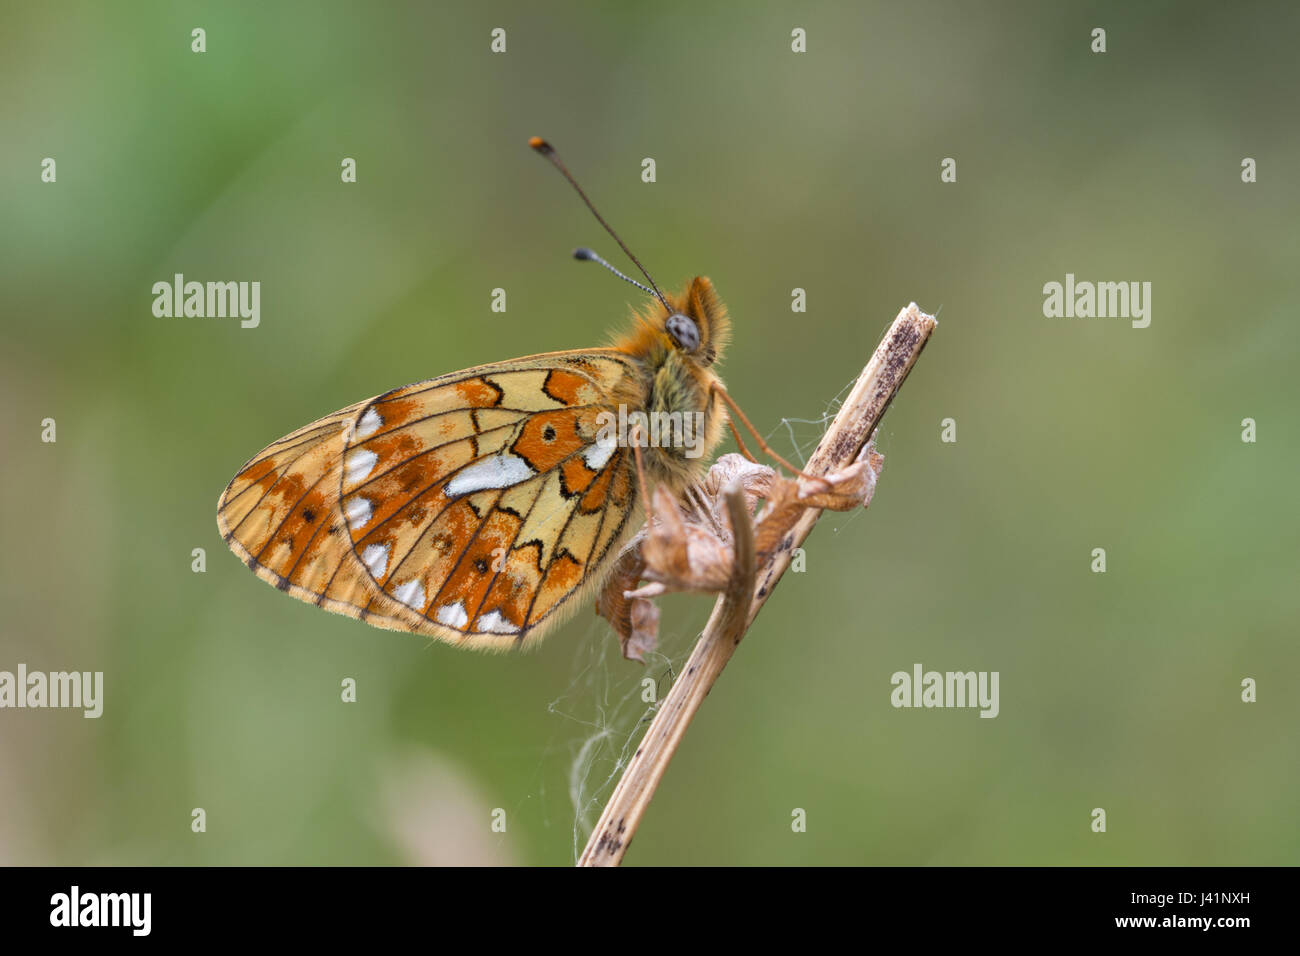 Close-up of pearl-bordé fritillary butterfly (Boloria euphrosyne), Royaume-Uni Banque D'Images